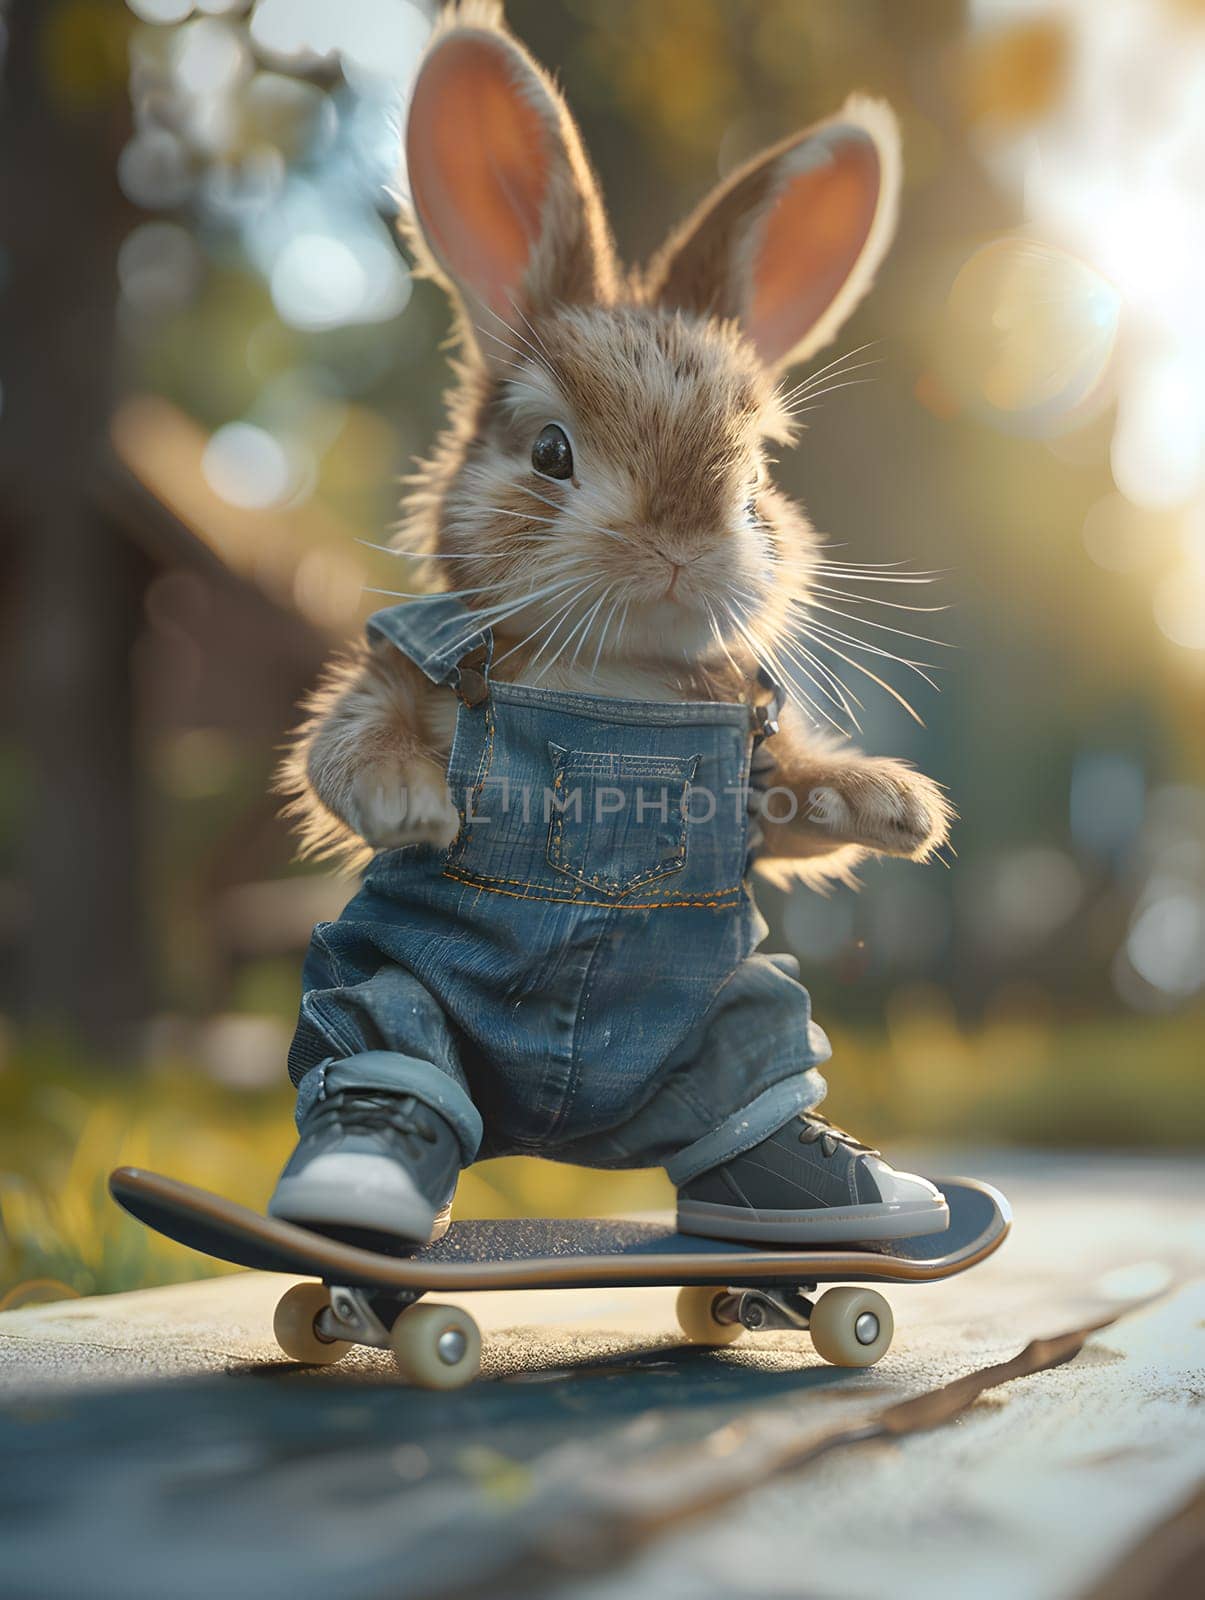 A Rabbit is rolling on a Skateboard deck across a wooden table, showcasing its skills as a Skateboarder in a natural material environment